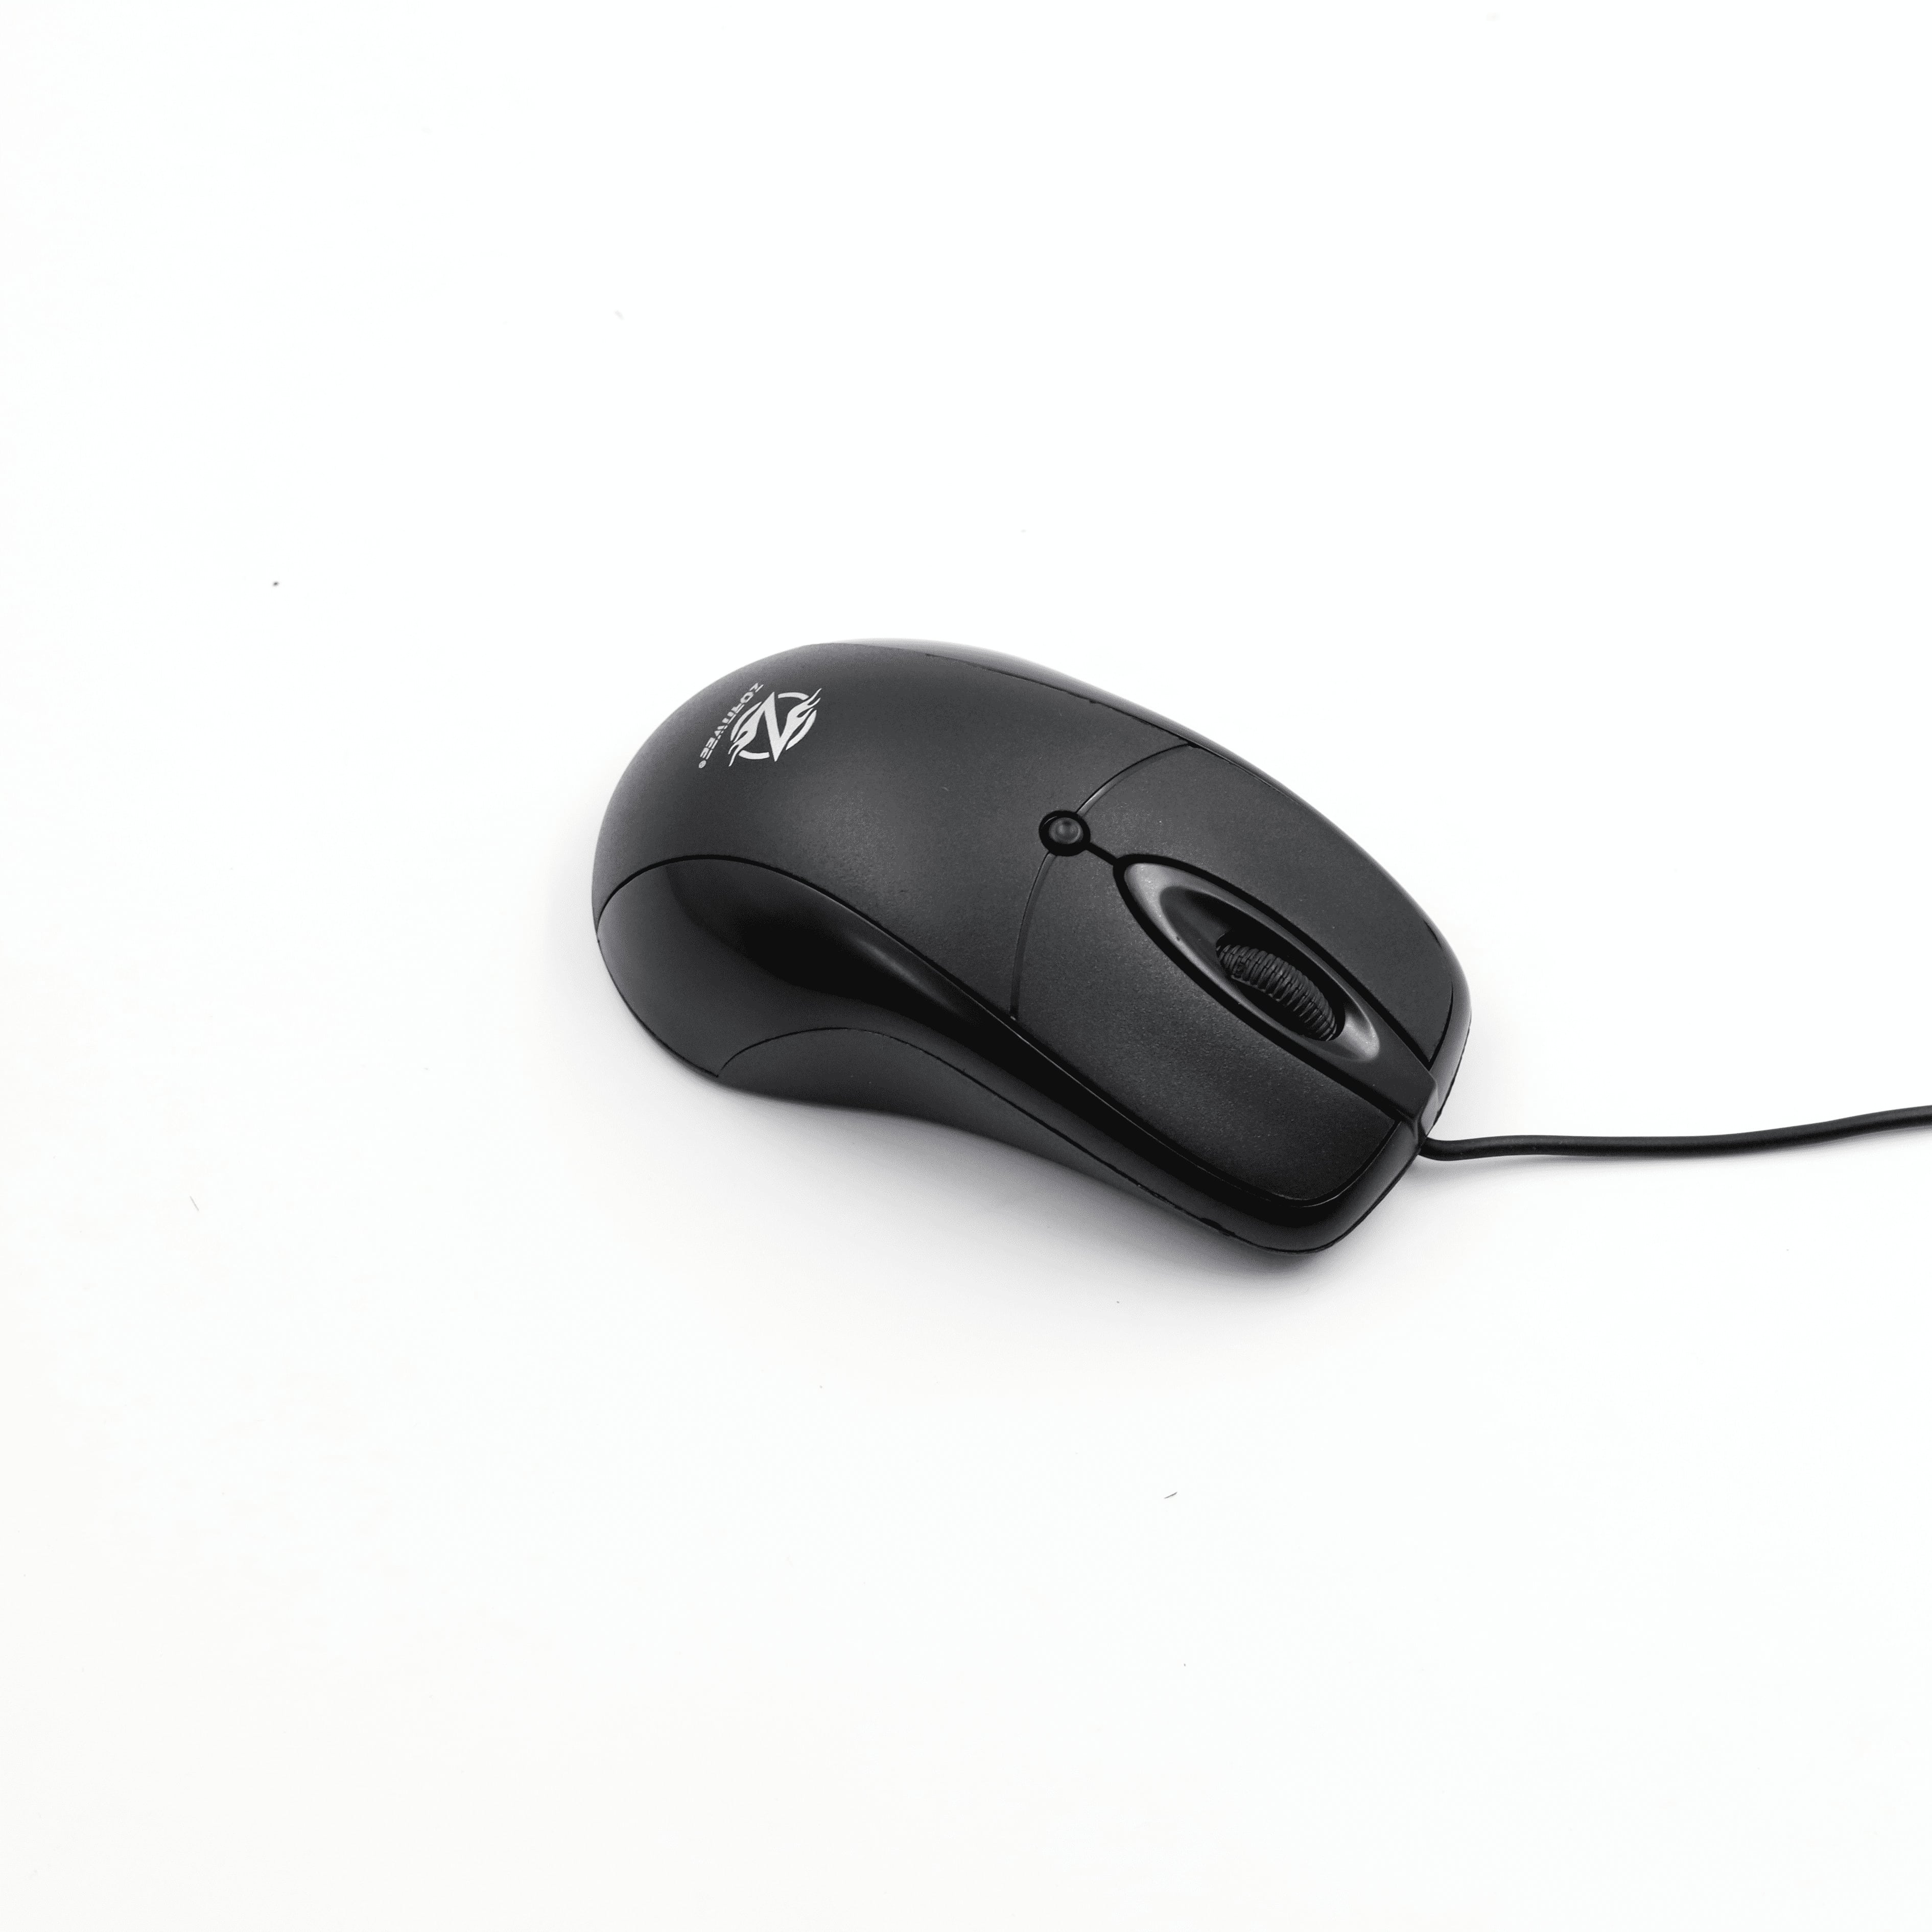 MOUSE ZORNWEE G628 COMFORTABLE USB, Mouse